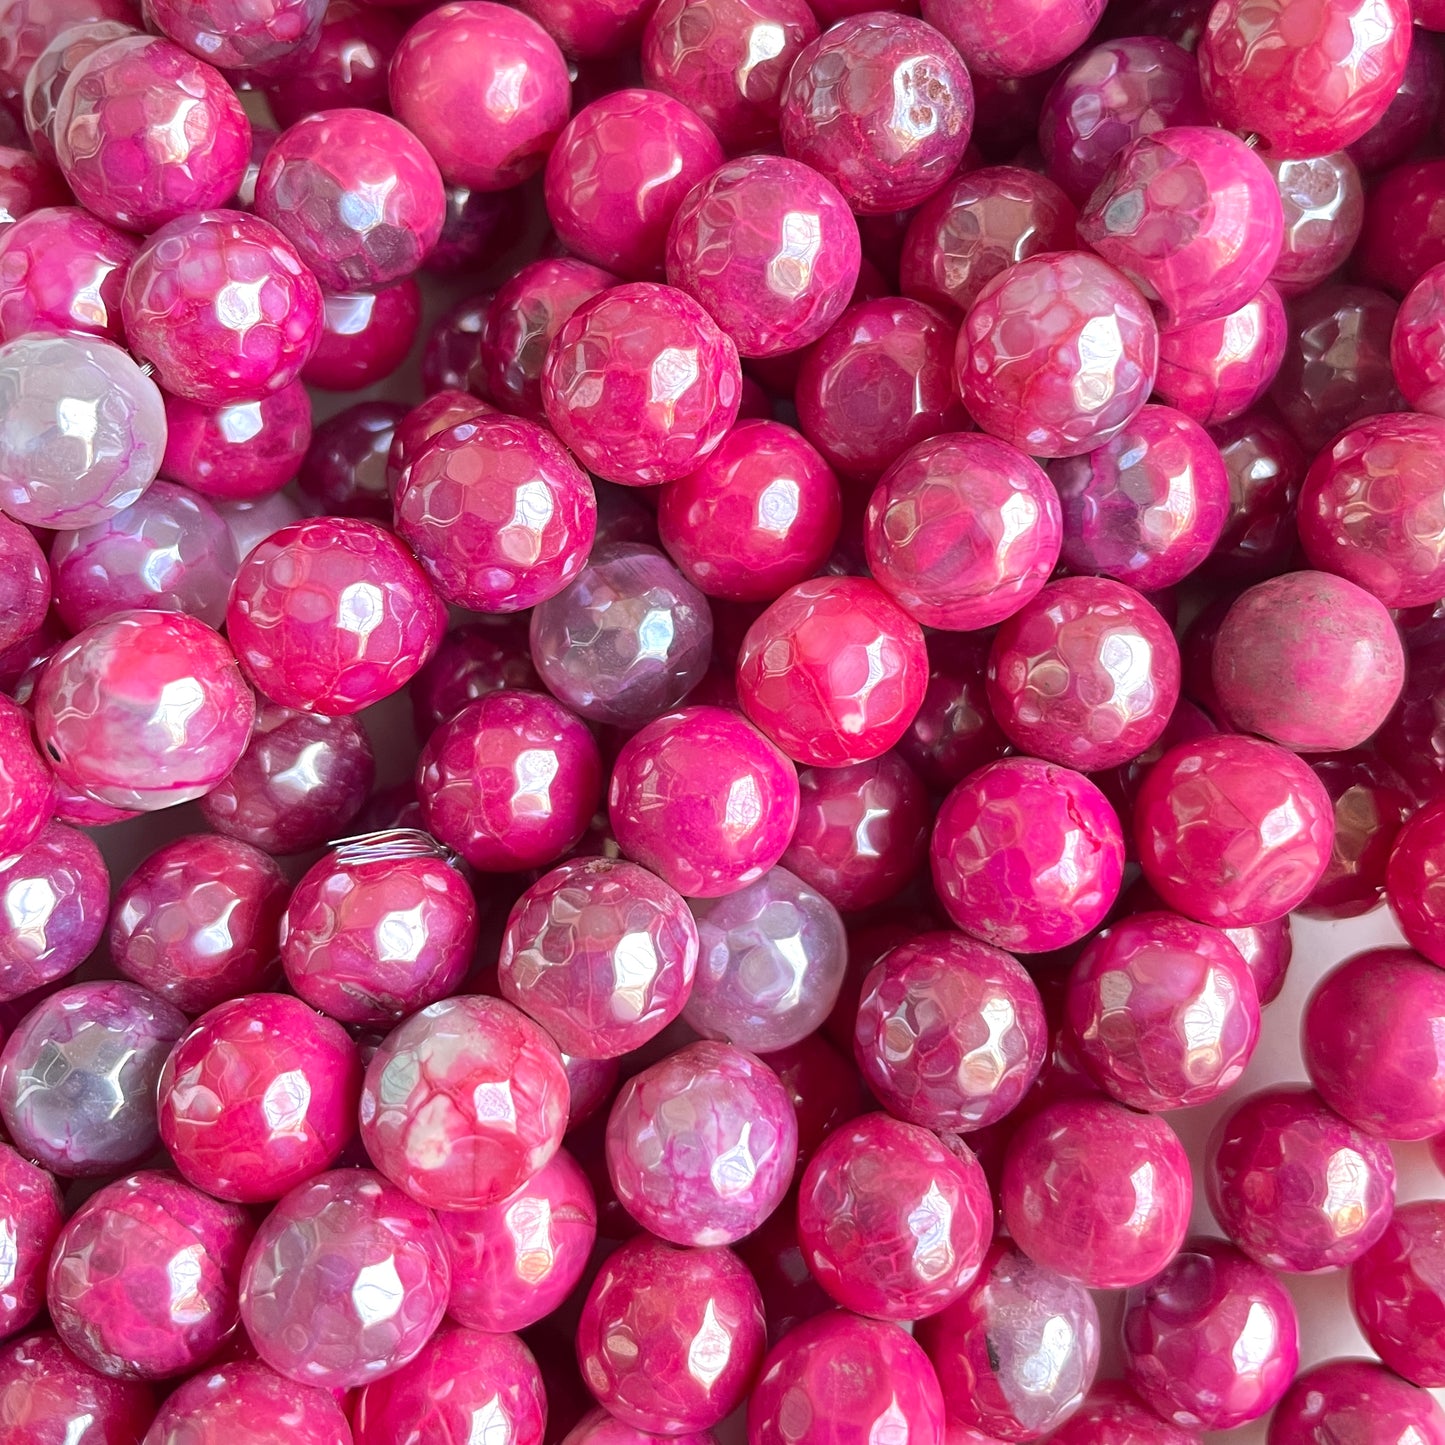 2 Strands/lot 10mm Electroplated Hot Pink Fuchsia Fire Agate Faceted Stone Beads Electroplated Beads Electroplated Faceted Agate Beads New Beads Arrivals Charms Beads Beyond